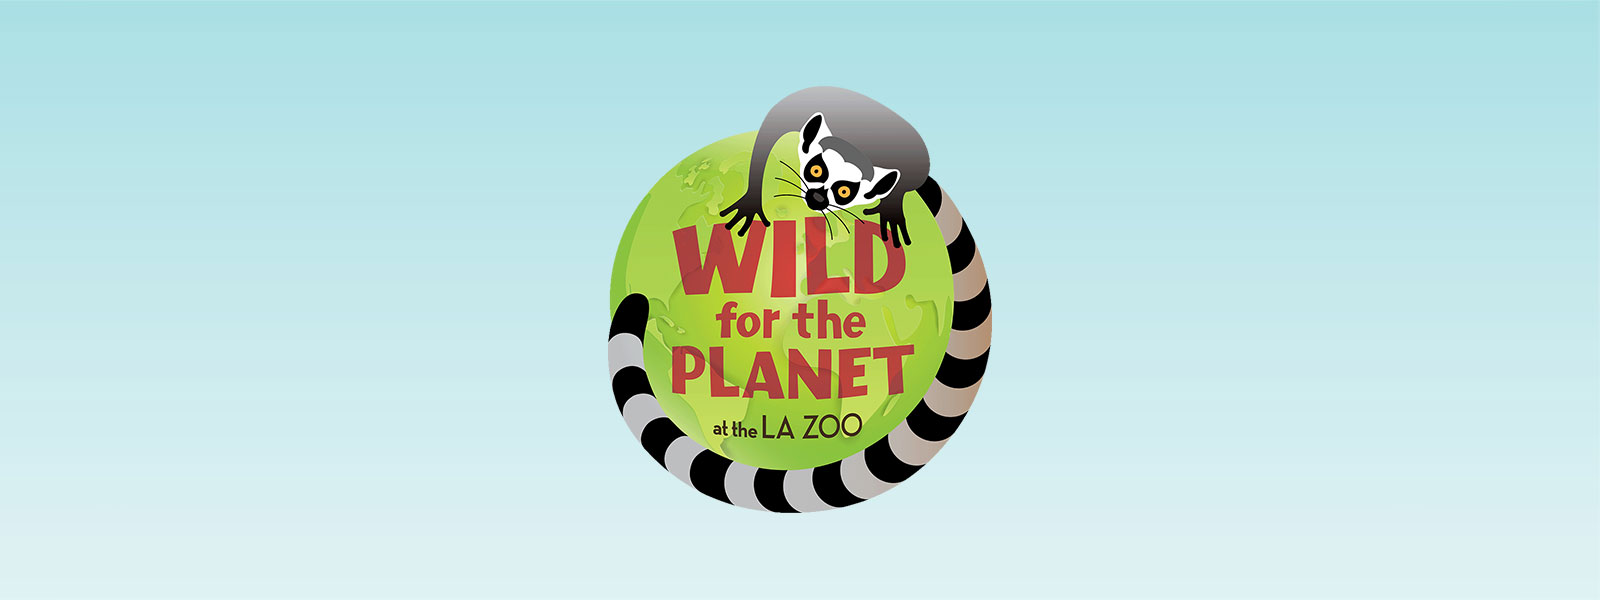 Wild for the Planet logo